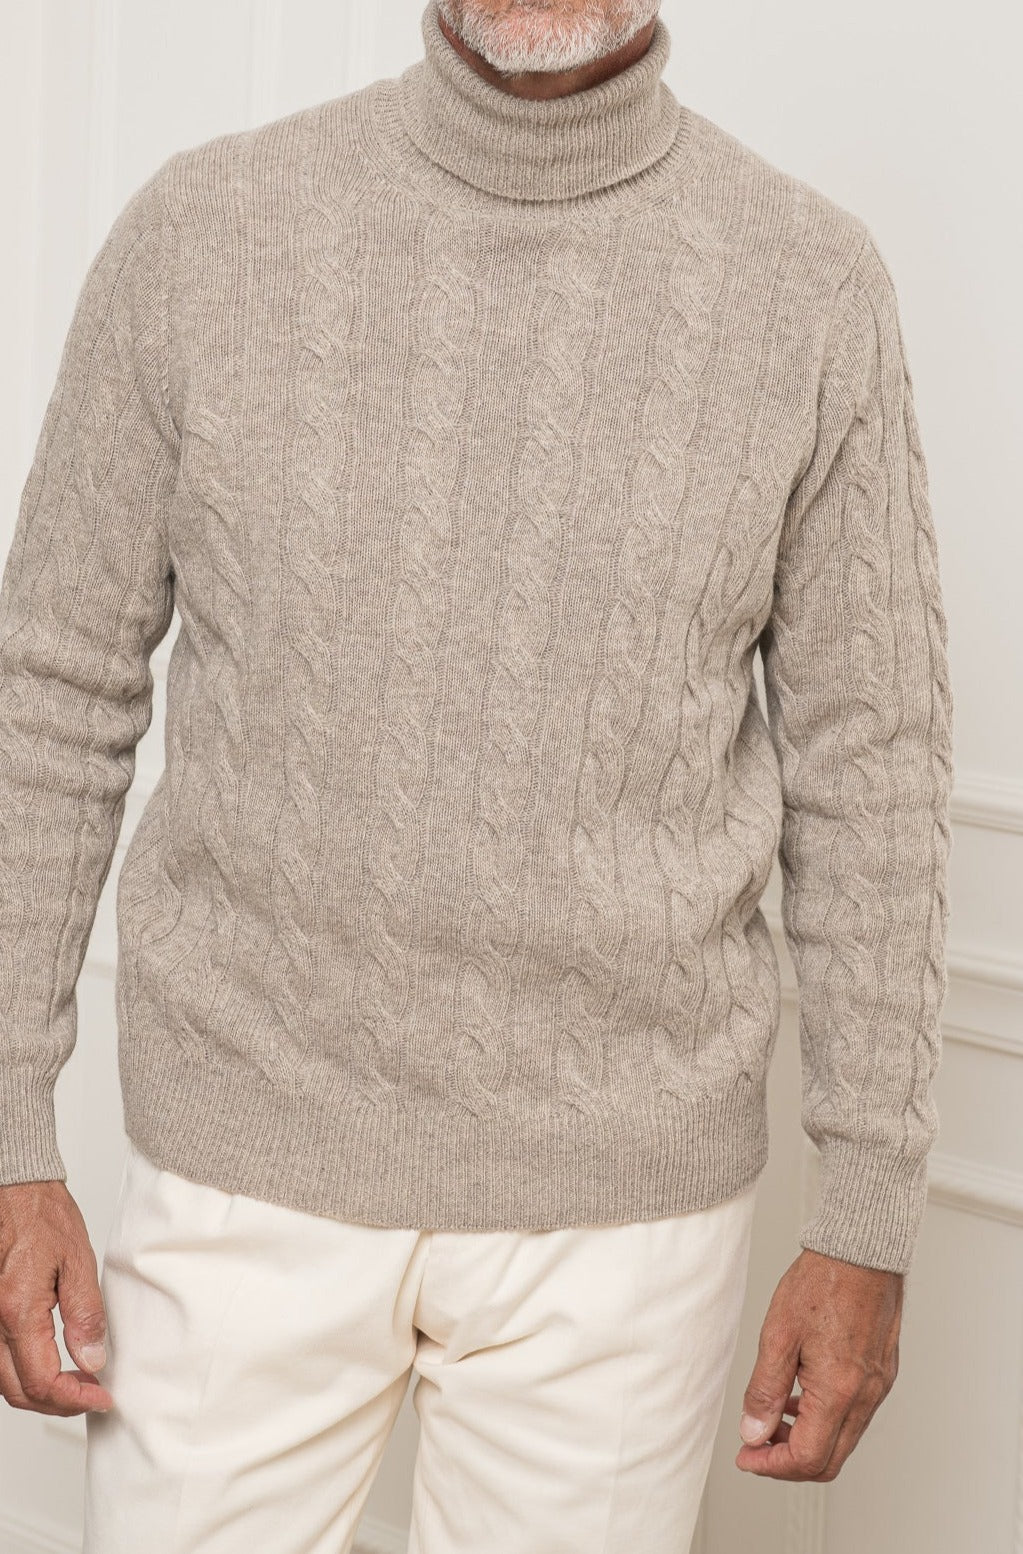 cable turtleneck, wool turtleneck, taupe turtleneck, taupe thick turtleneck, taupe knit, col roulé en câble, laine col roulé taupe, col roulé épais taupe, col roulé taupe, col roulé épais taupe, maille bleu, dolcevita cable, dolcevita taupe lana, dolcevita spesso, dolcevita, maglia taupe, dolcevita taupe